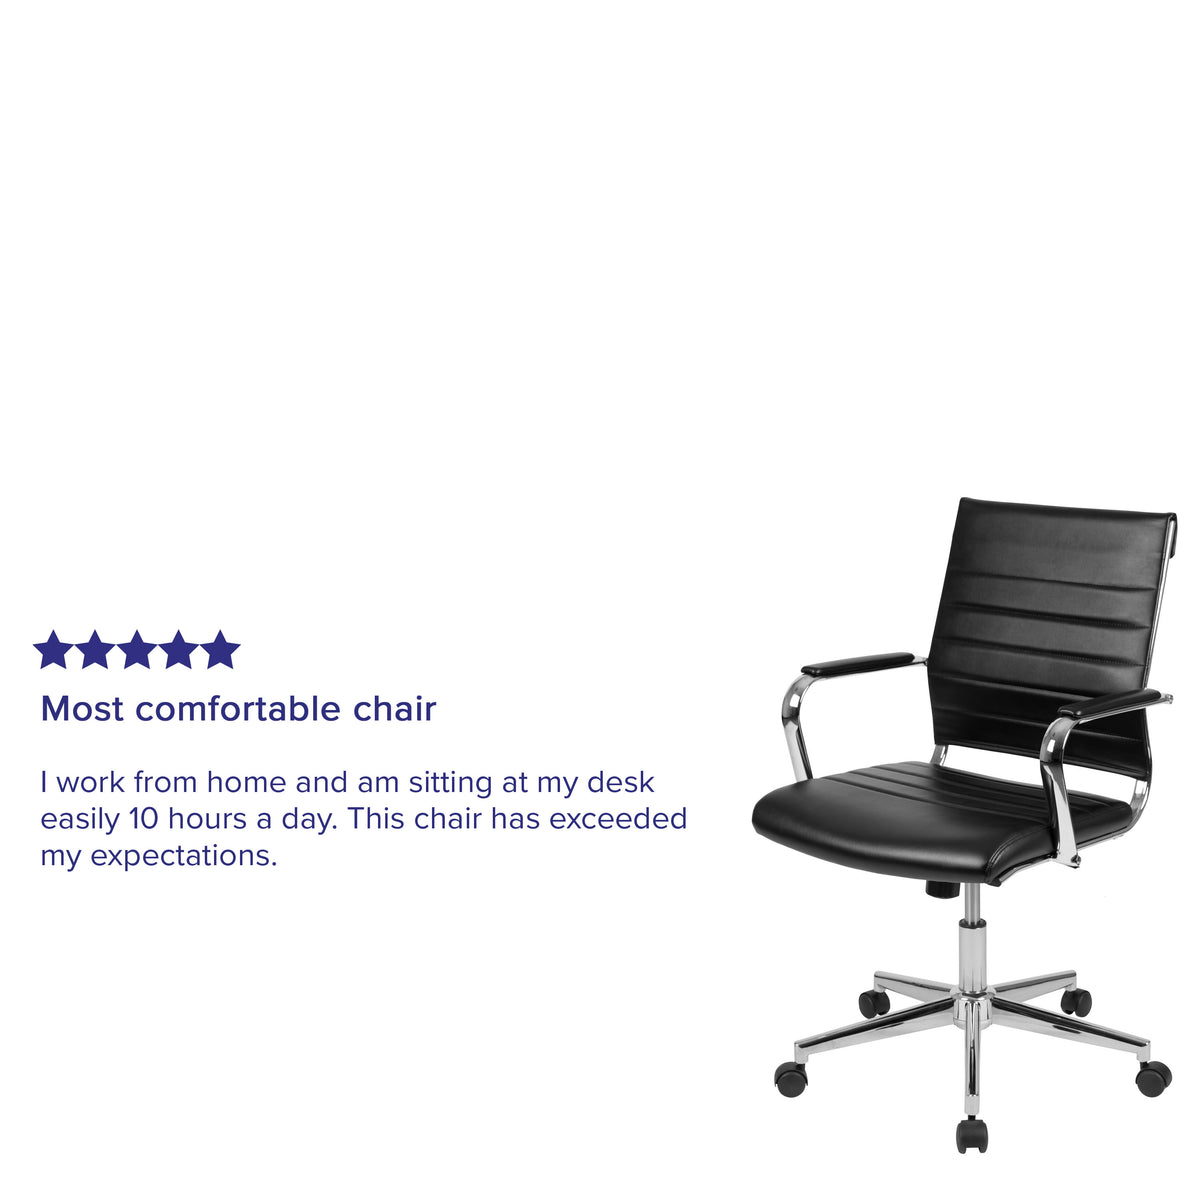 Black |#| Mid-Back Black LeatherSoft Ribbed Executive Swivel Office Chair - Desk Chair